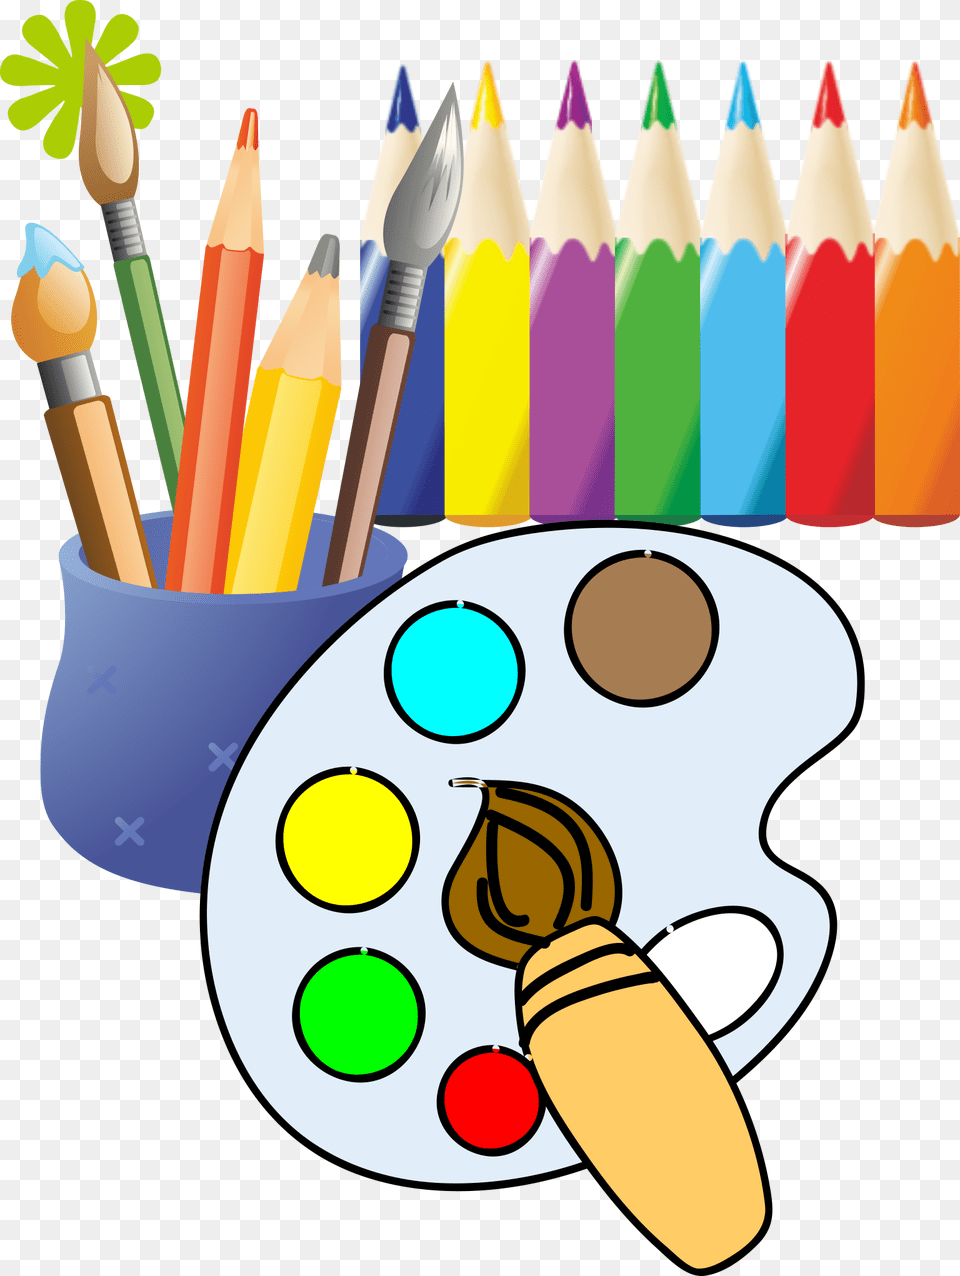 Paint Clipart Painting Decorating And Inspiration Drawing And Painting Clip Art, Paint Container, Palette Free Png Download